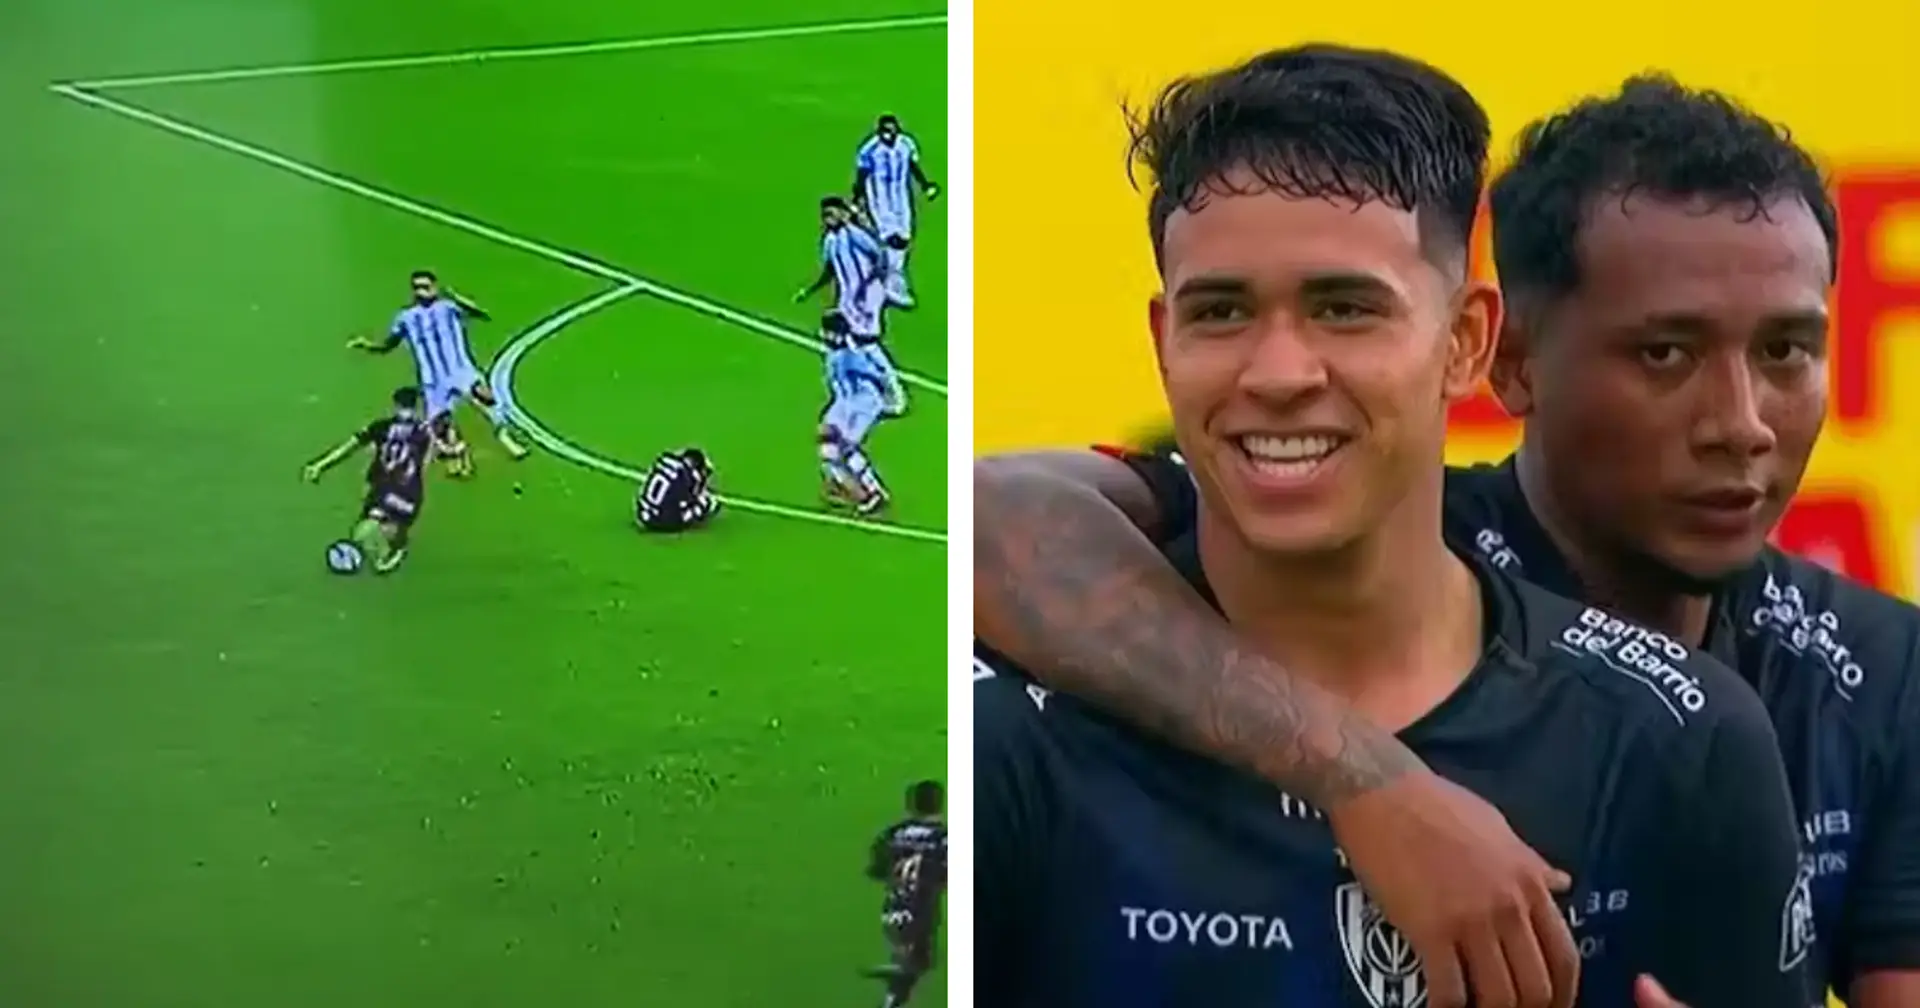 Kendry Paez scores a belter for first team at Independiente del Valle